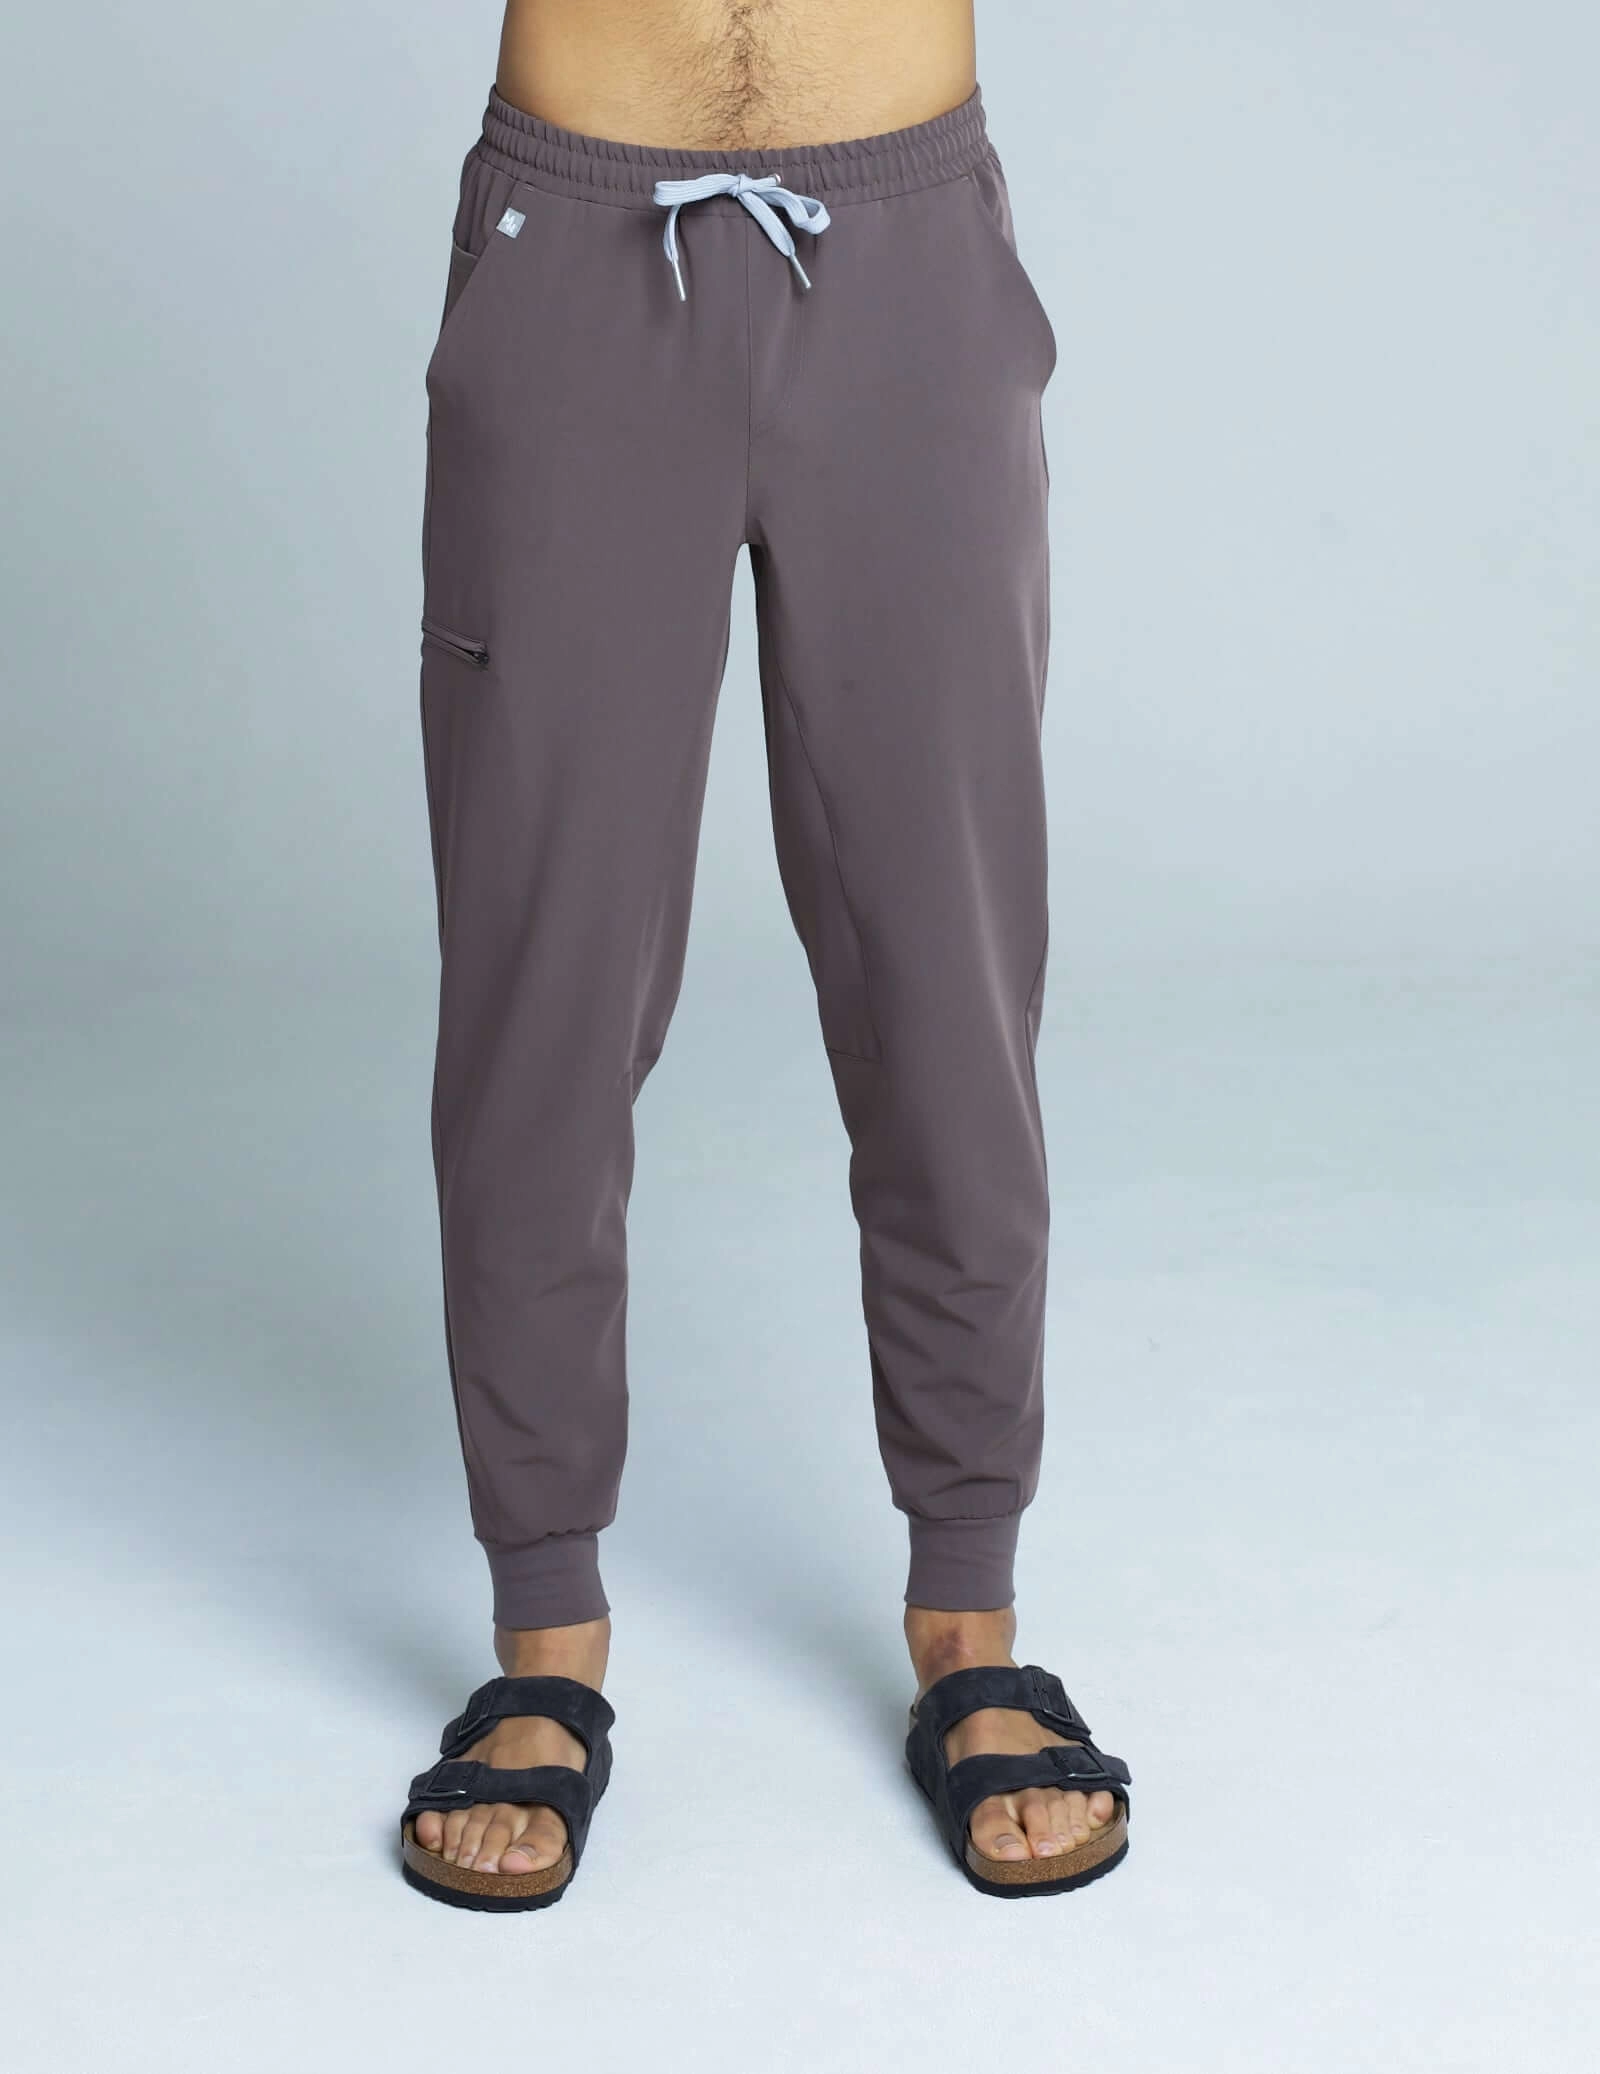 OUTLET Herren Jogger - CHOCOLATE BROWN